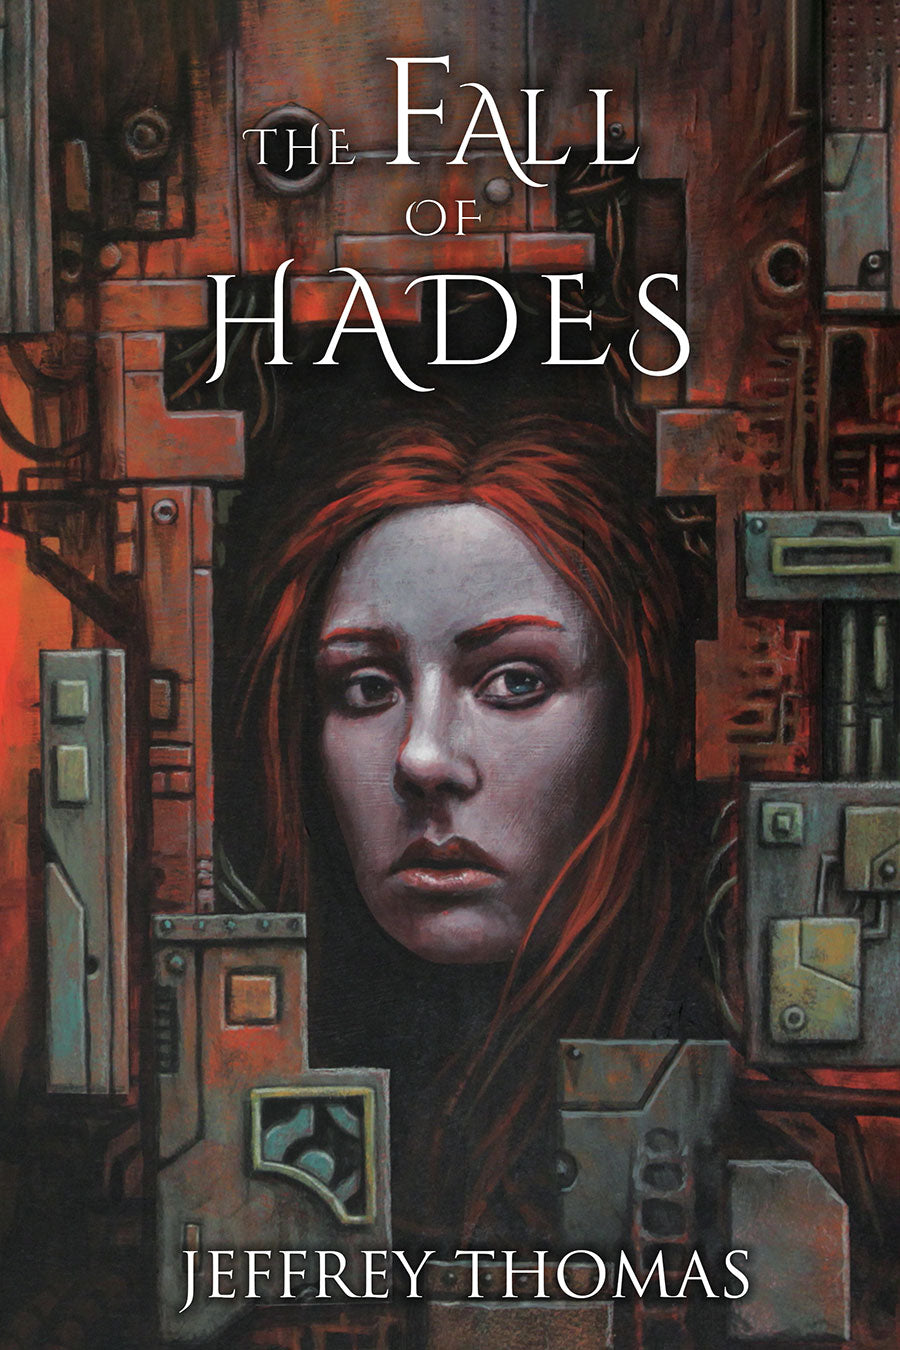 The Fall of Hades by Jeffrey Thomas